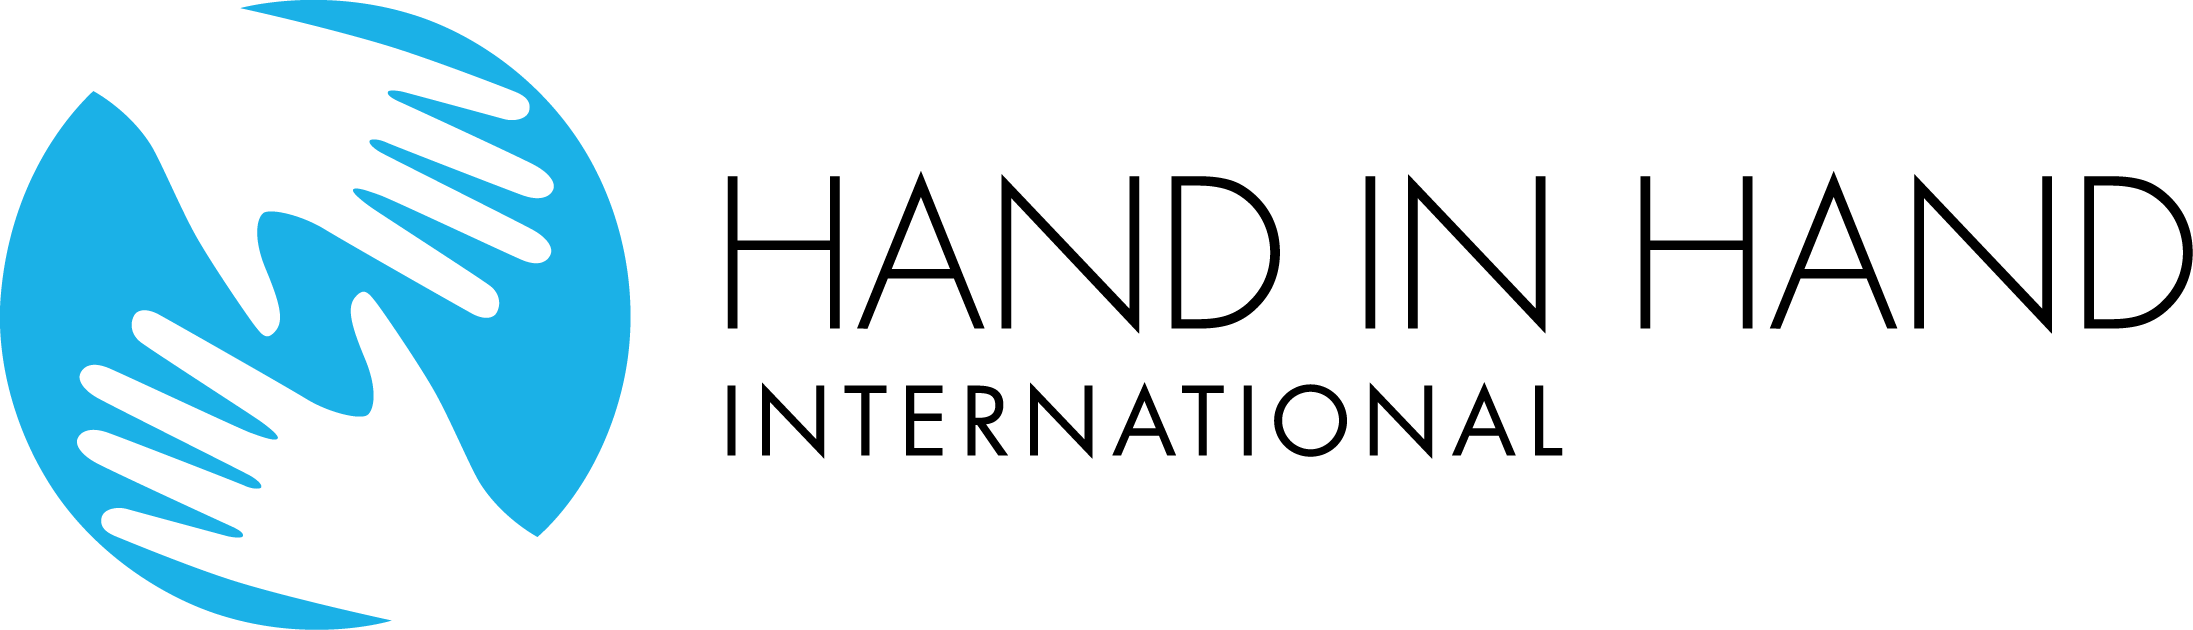 Hand in Hand Logo - Instant Impact and Hand in Hand International